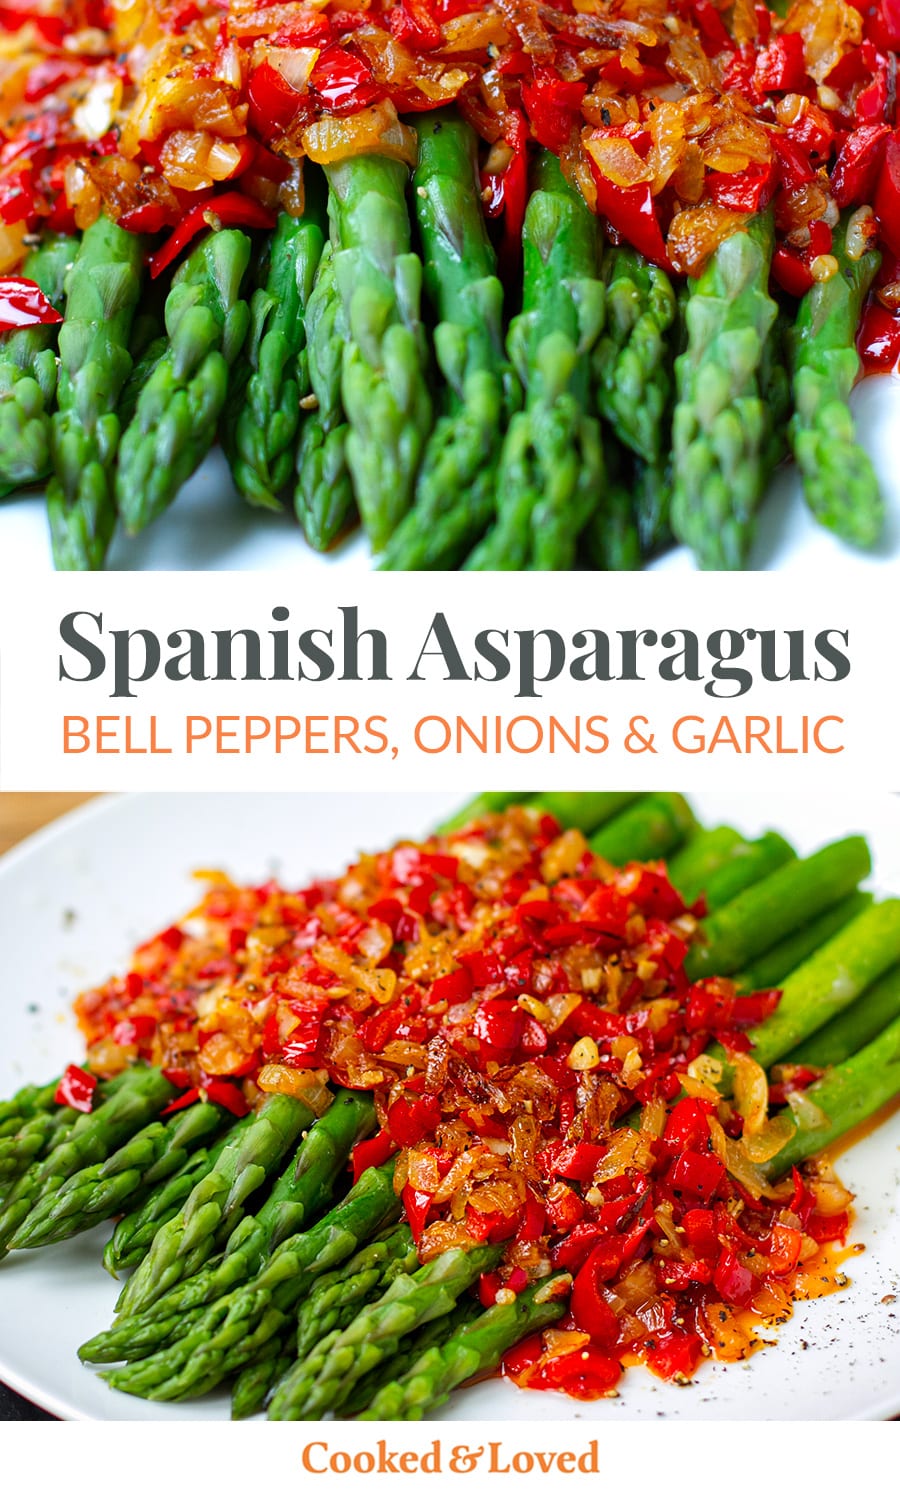 Asparagus With Red Bell Peppers, Onions & Garlic